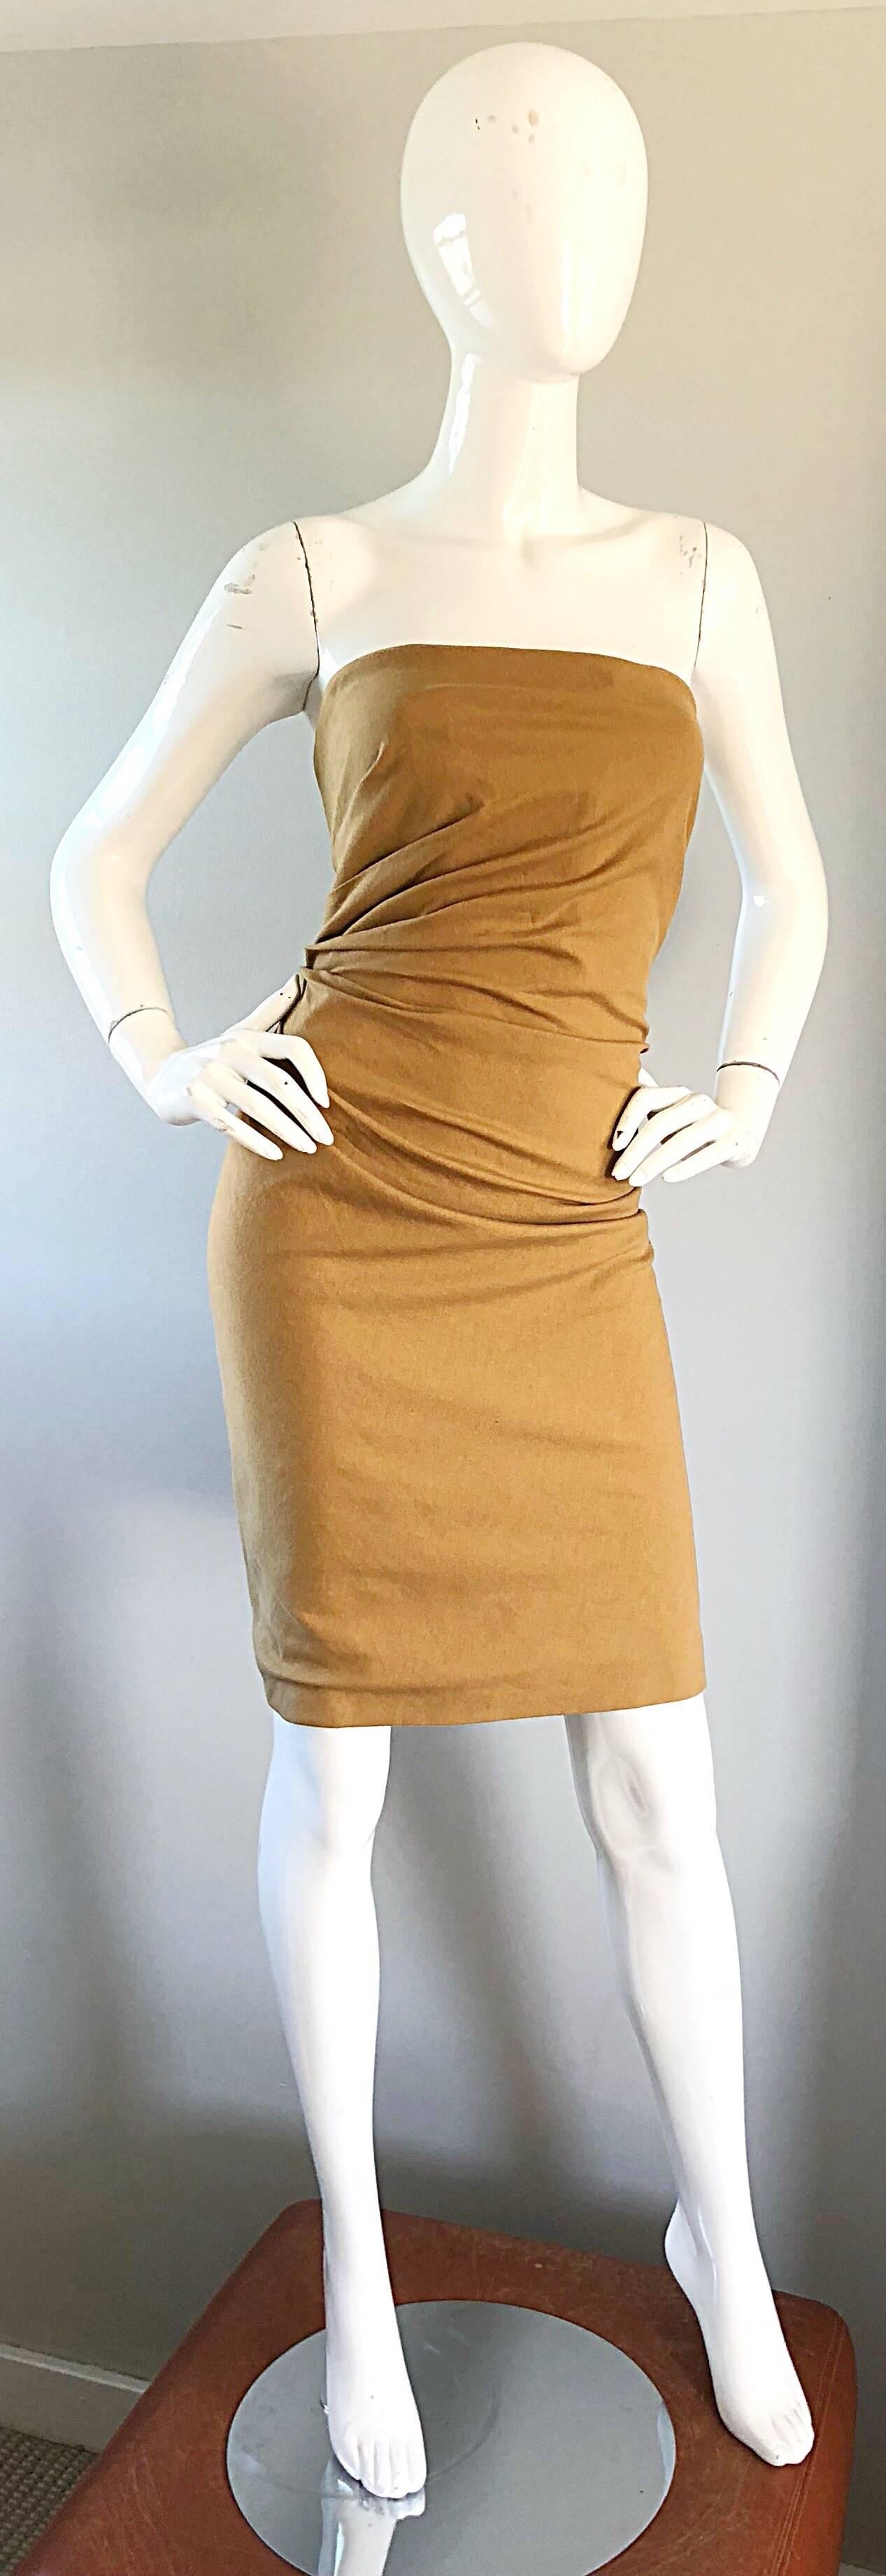 Gucci by Tom Ford Larger Size 48 12 1990s Tan Camel Cage Back 90s Vintage Dress  In Excellent Condition For Sale In San Diego, CA